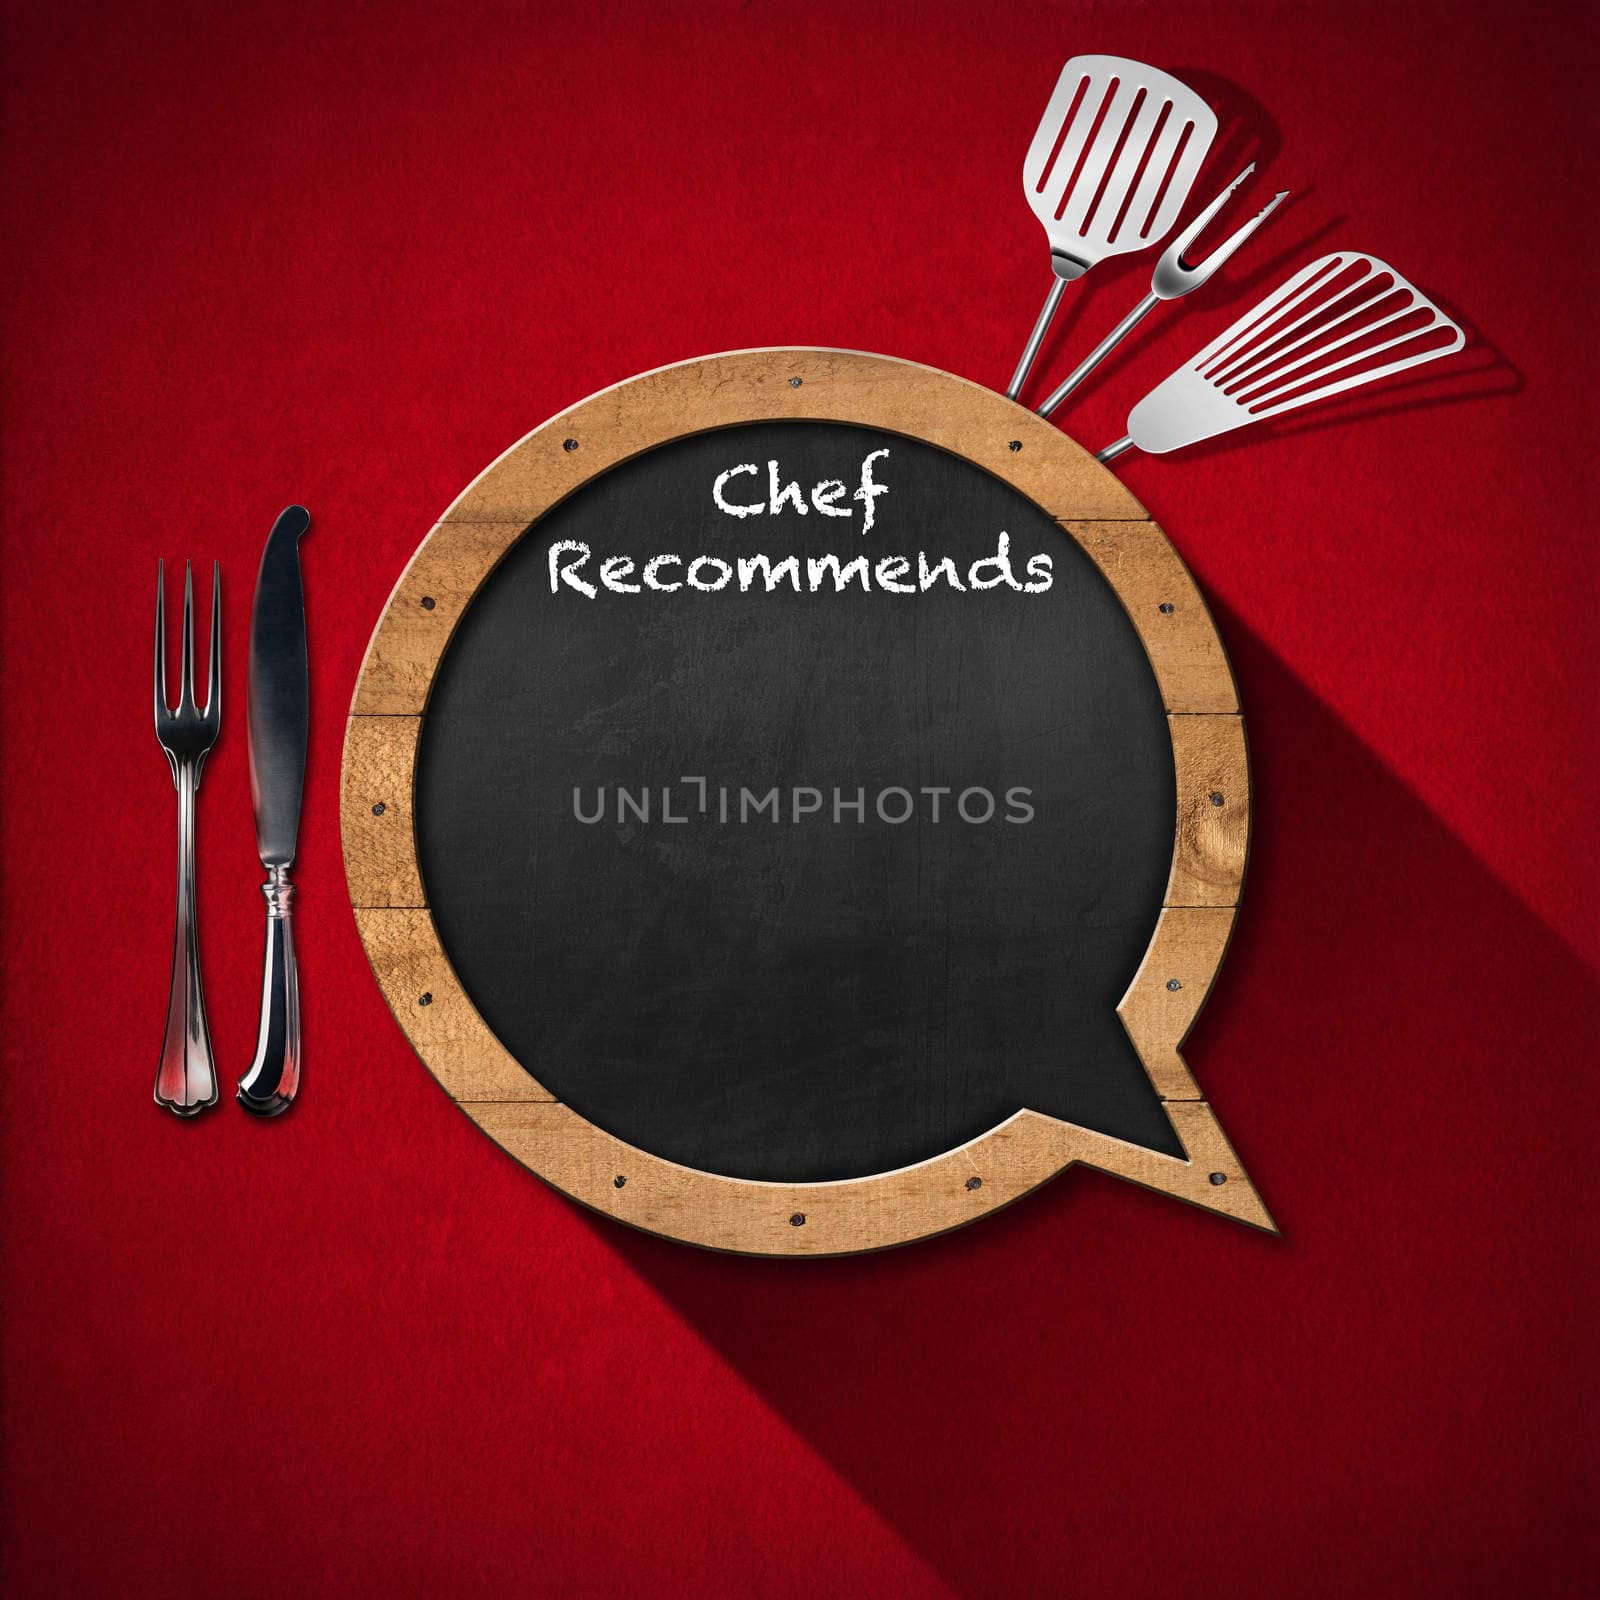 Blackboard in the shape of speech bubble with text Chef Recommends with kitchen utensils on a red velvet background